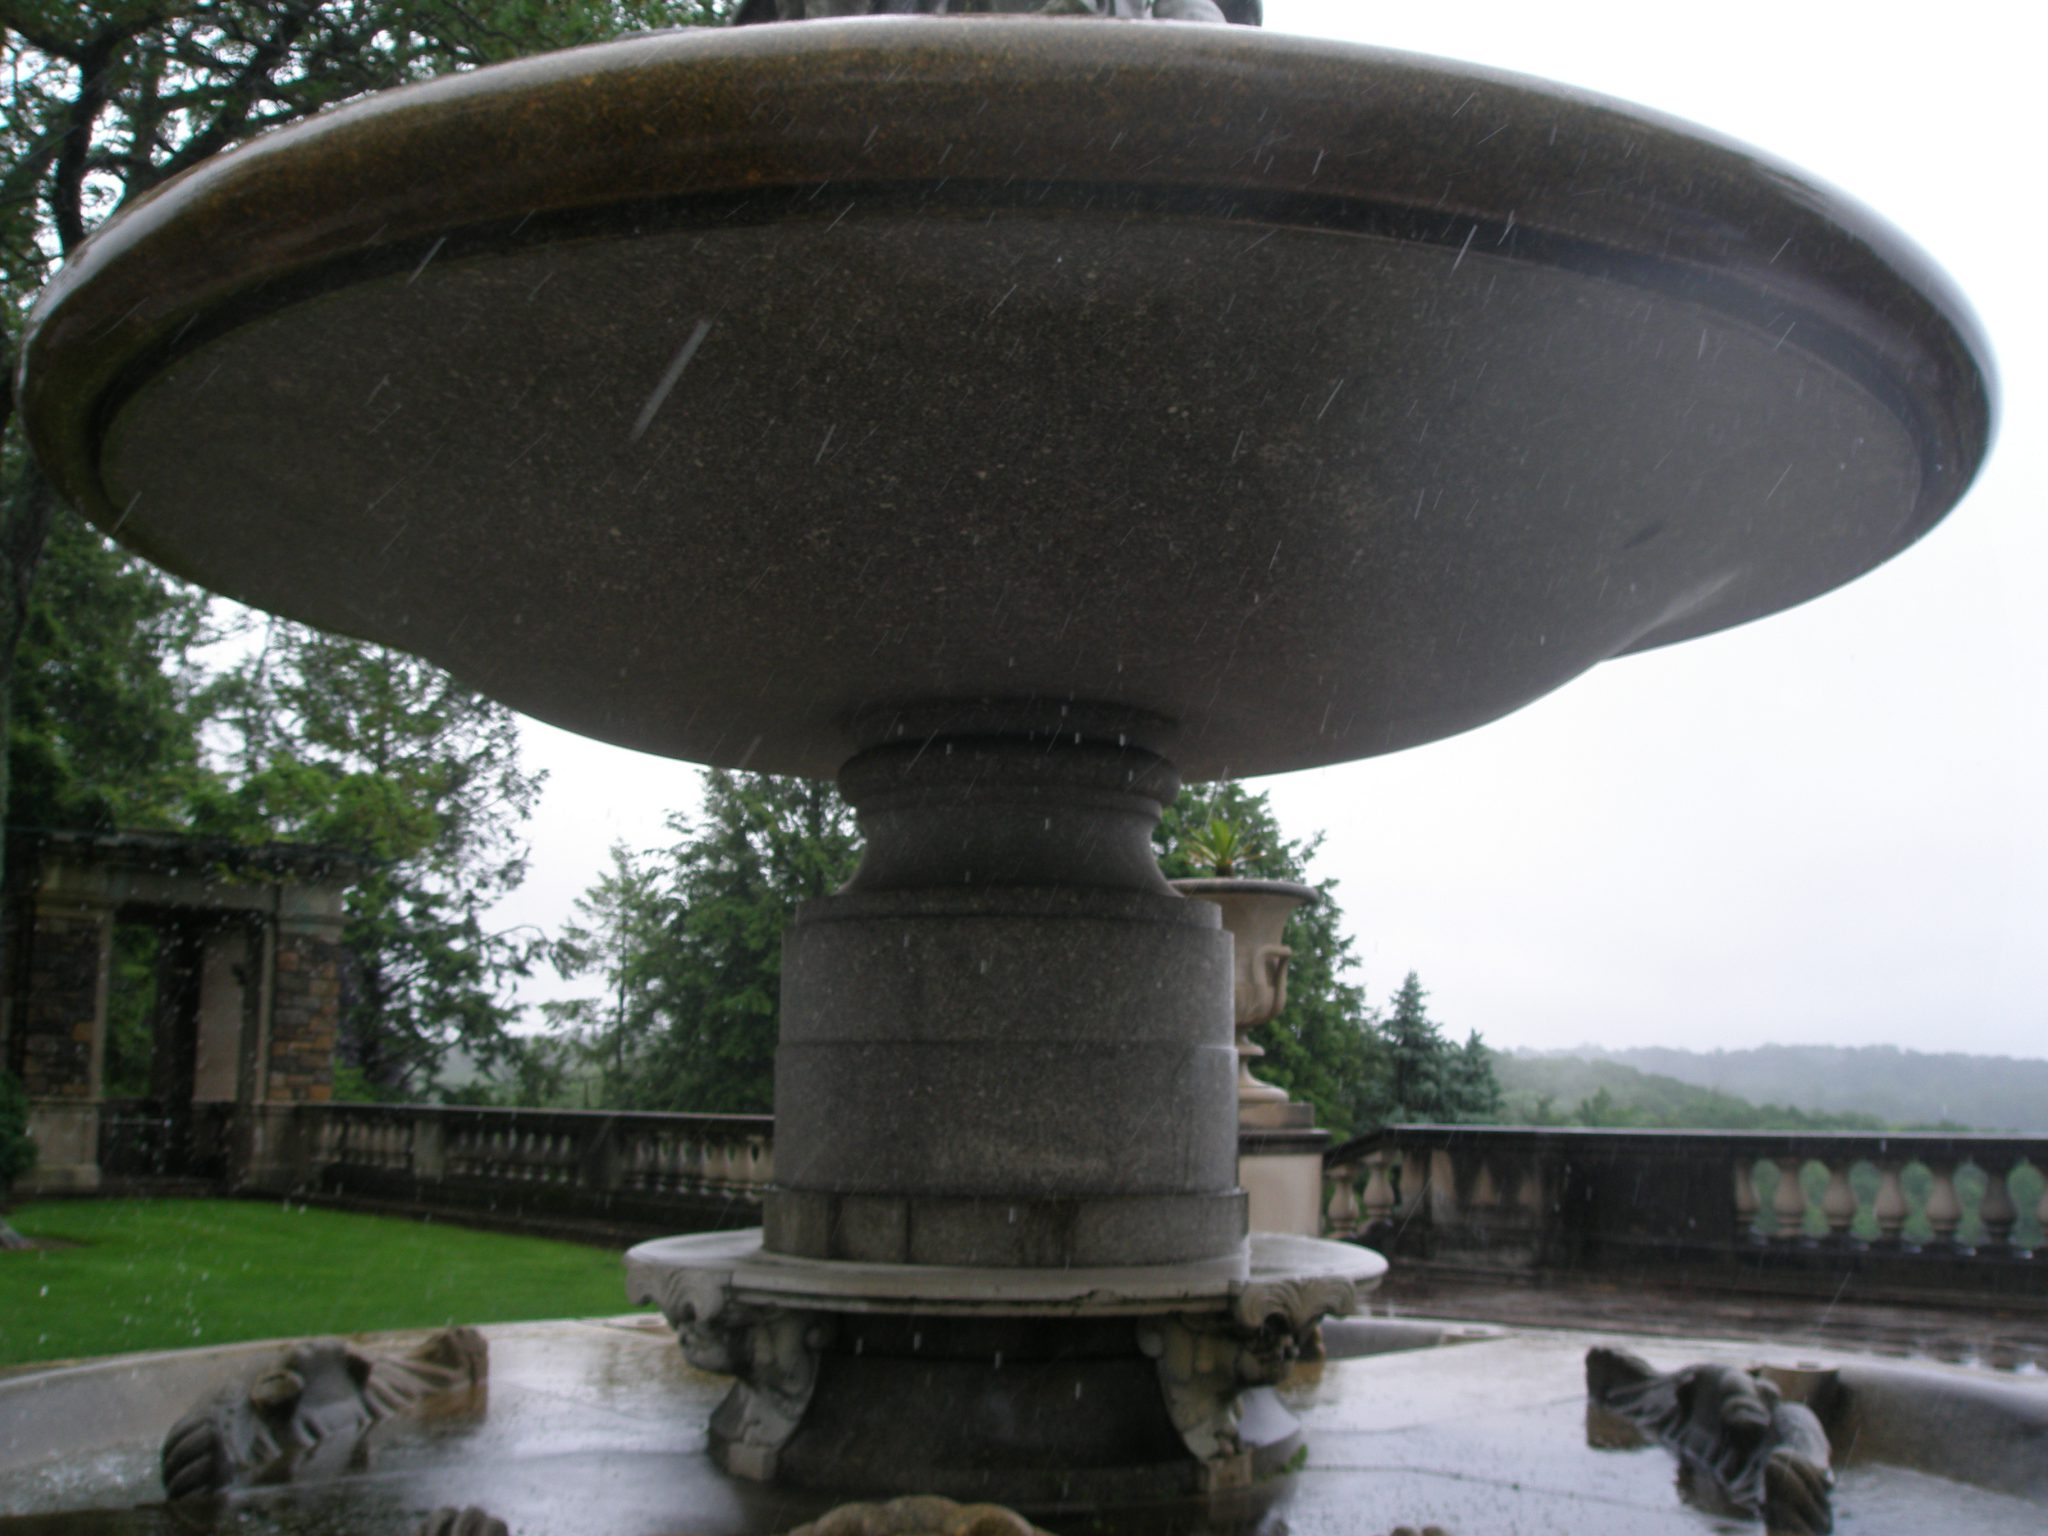 The Granite Bowl of the Oceanus Fountain is 20 feet in diameter and weighs 35 tons. It was produced in Maine, and shipped to Kykuit in 1914. I cannot imagine how difficult shipping this hunk of rock must have been.